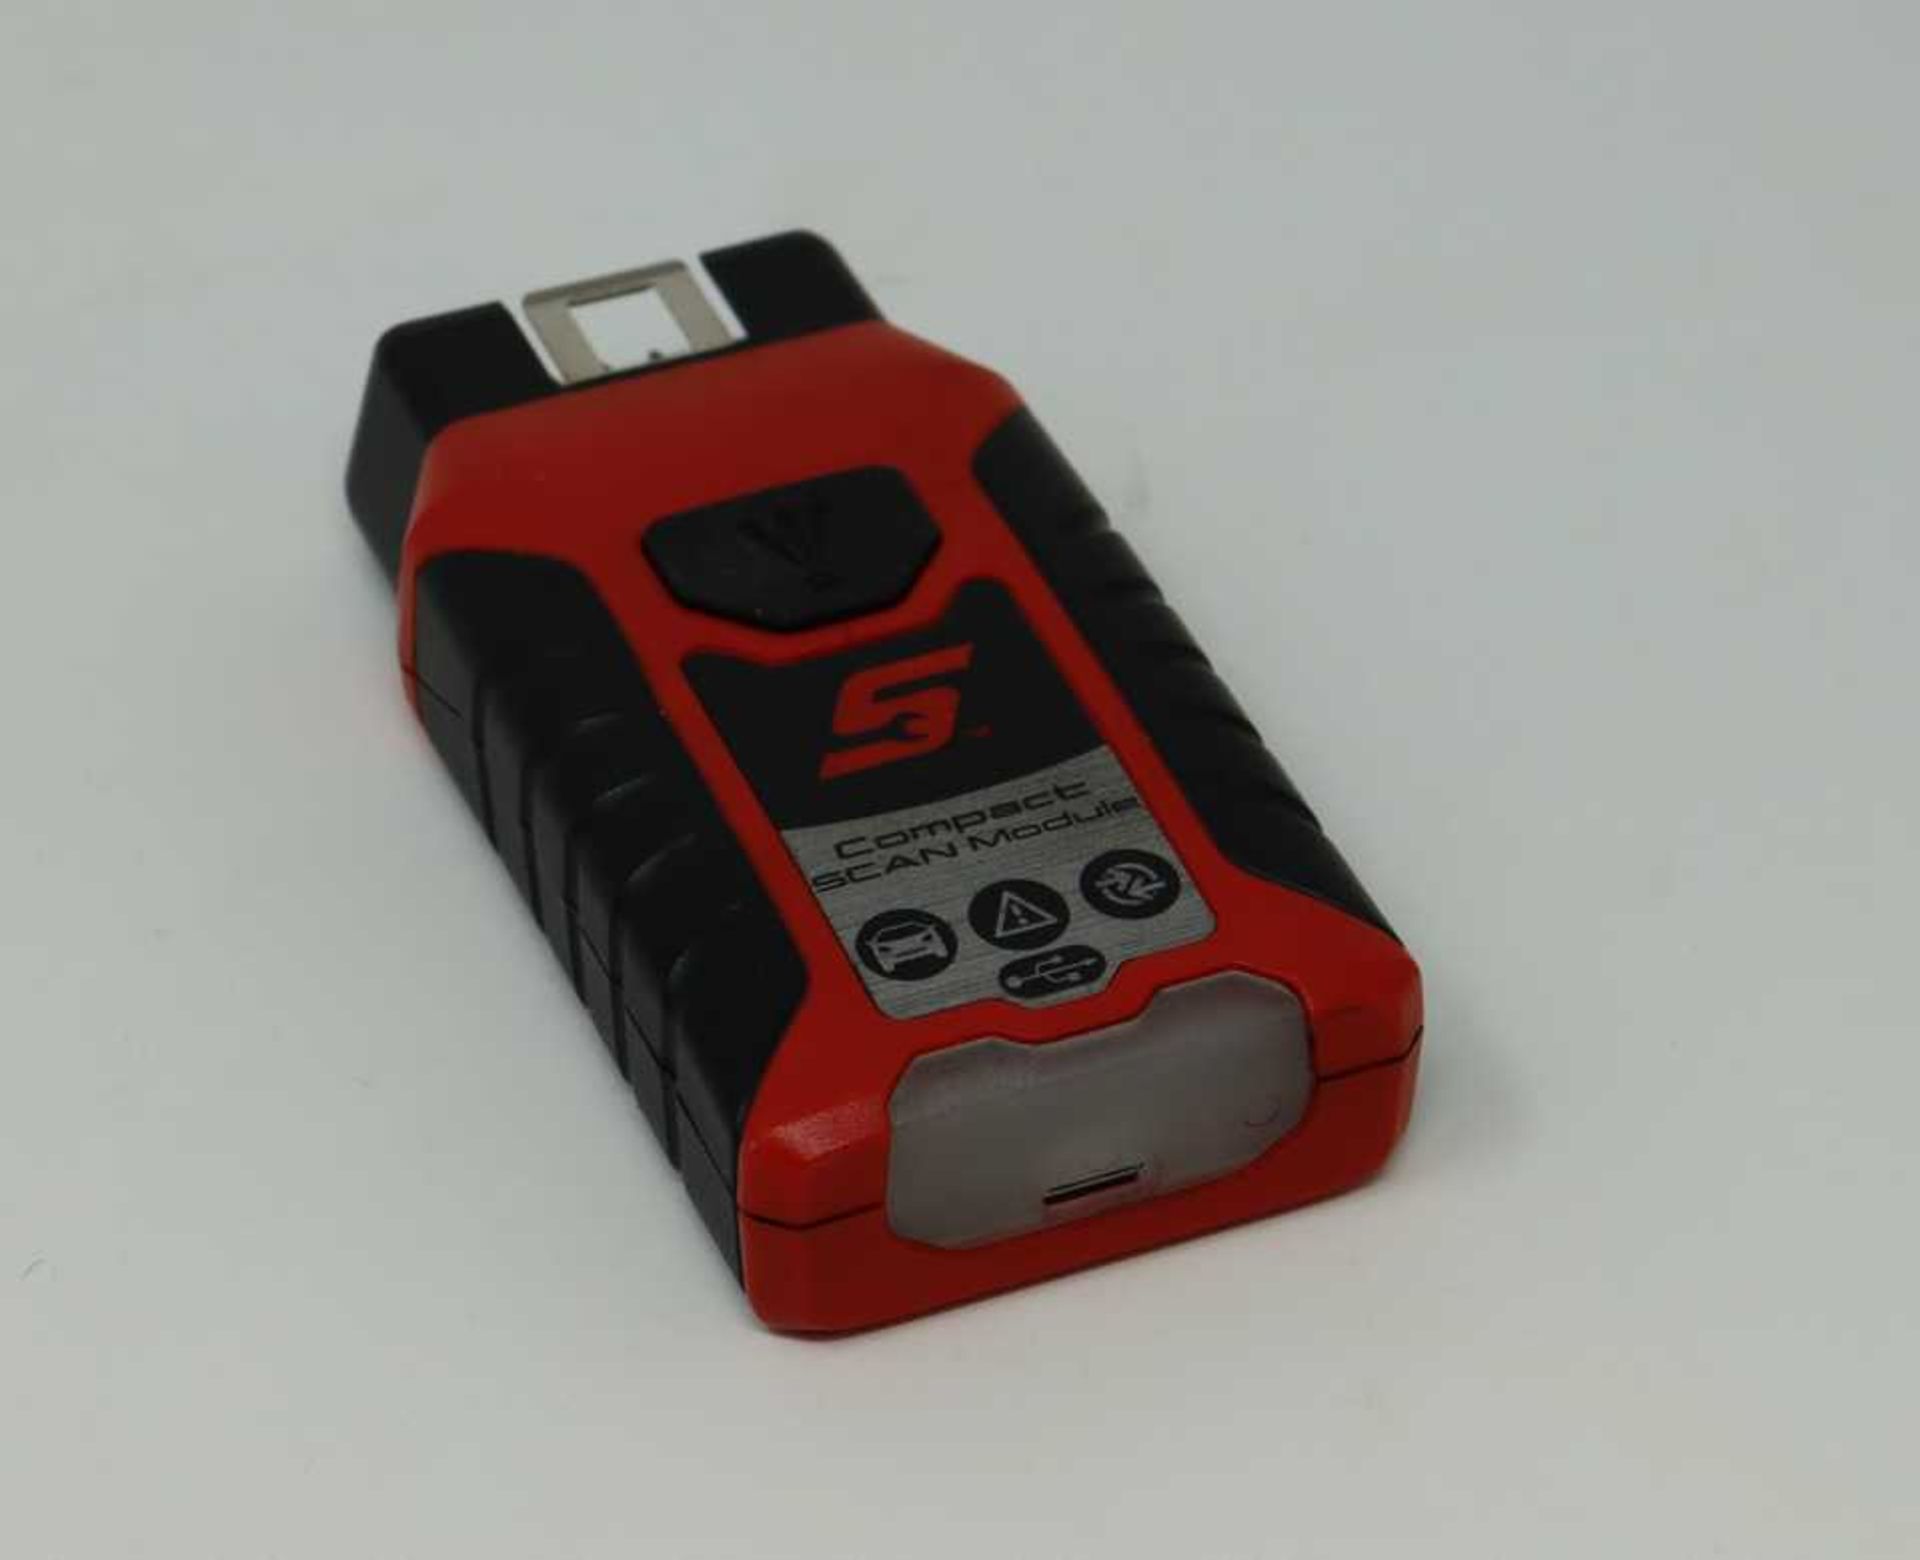 A pre-owned Snap On Compact Scan Module 5 (Model: EESM304A) (Powers on but not tested further).